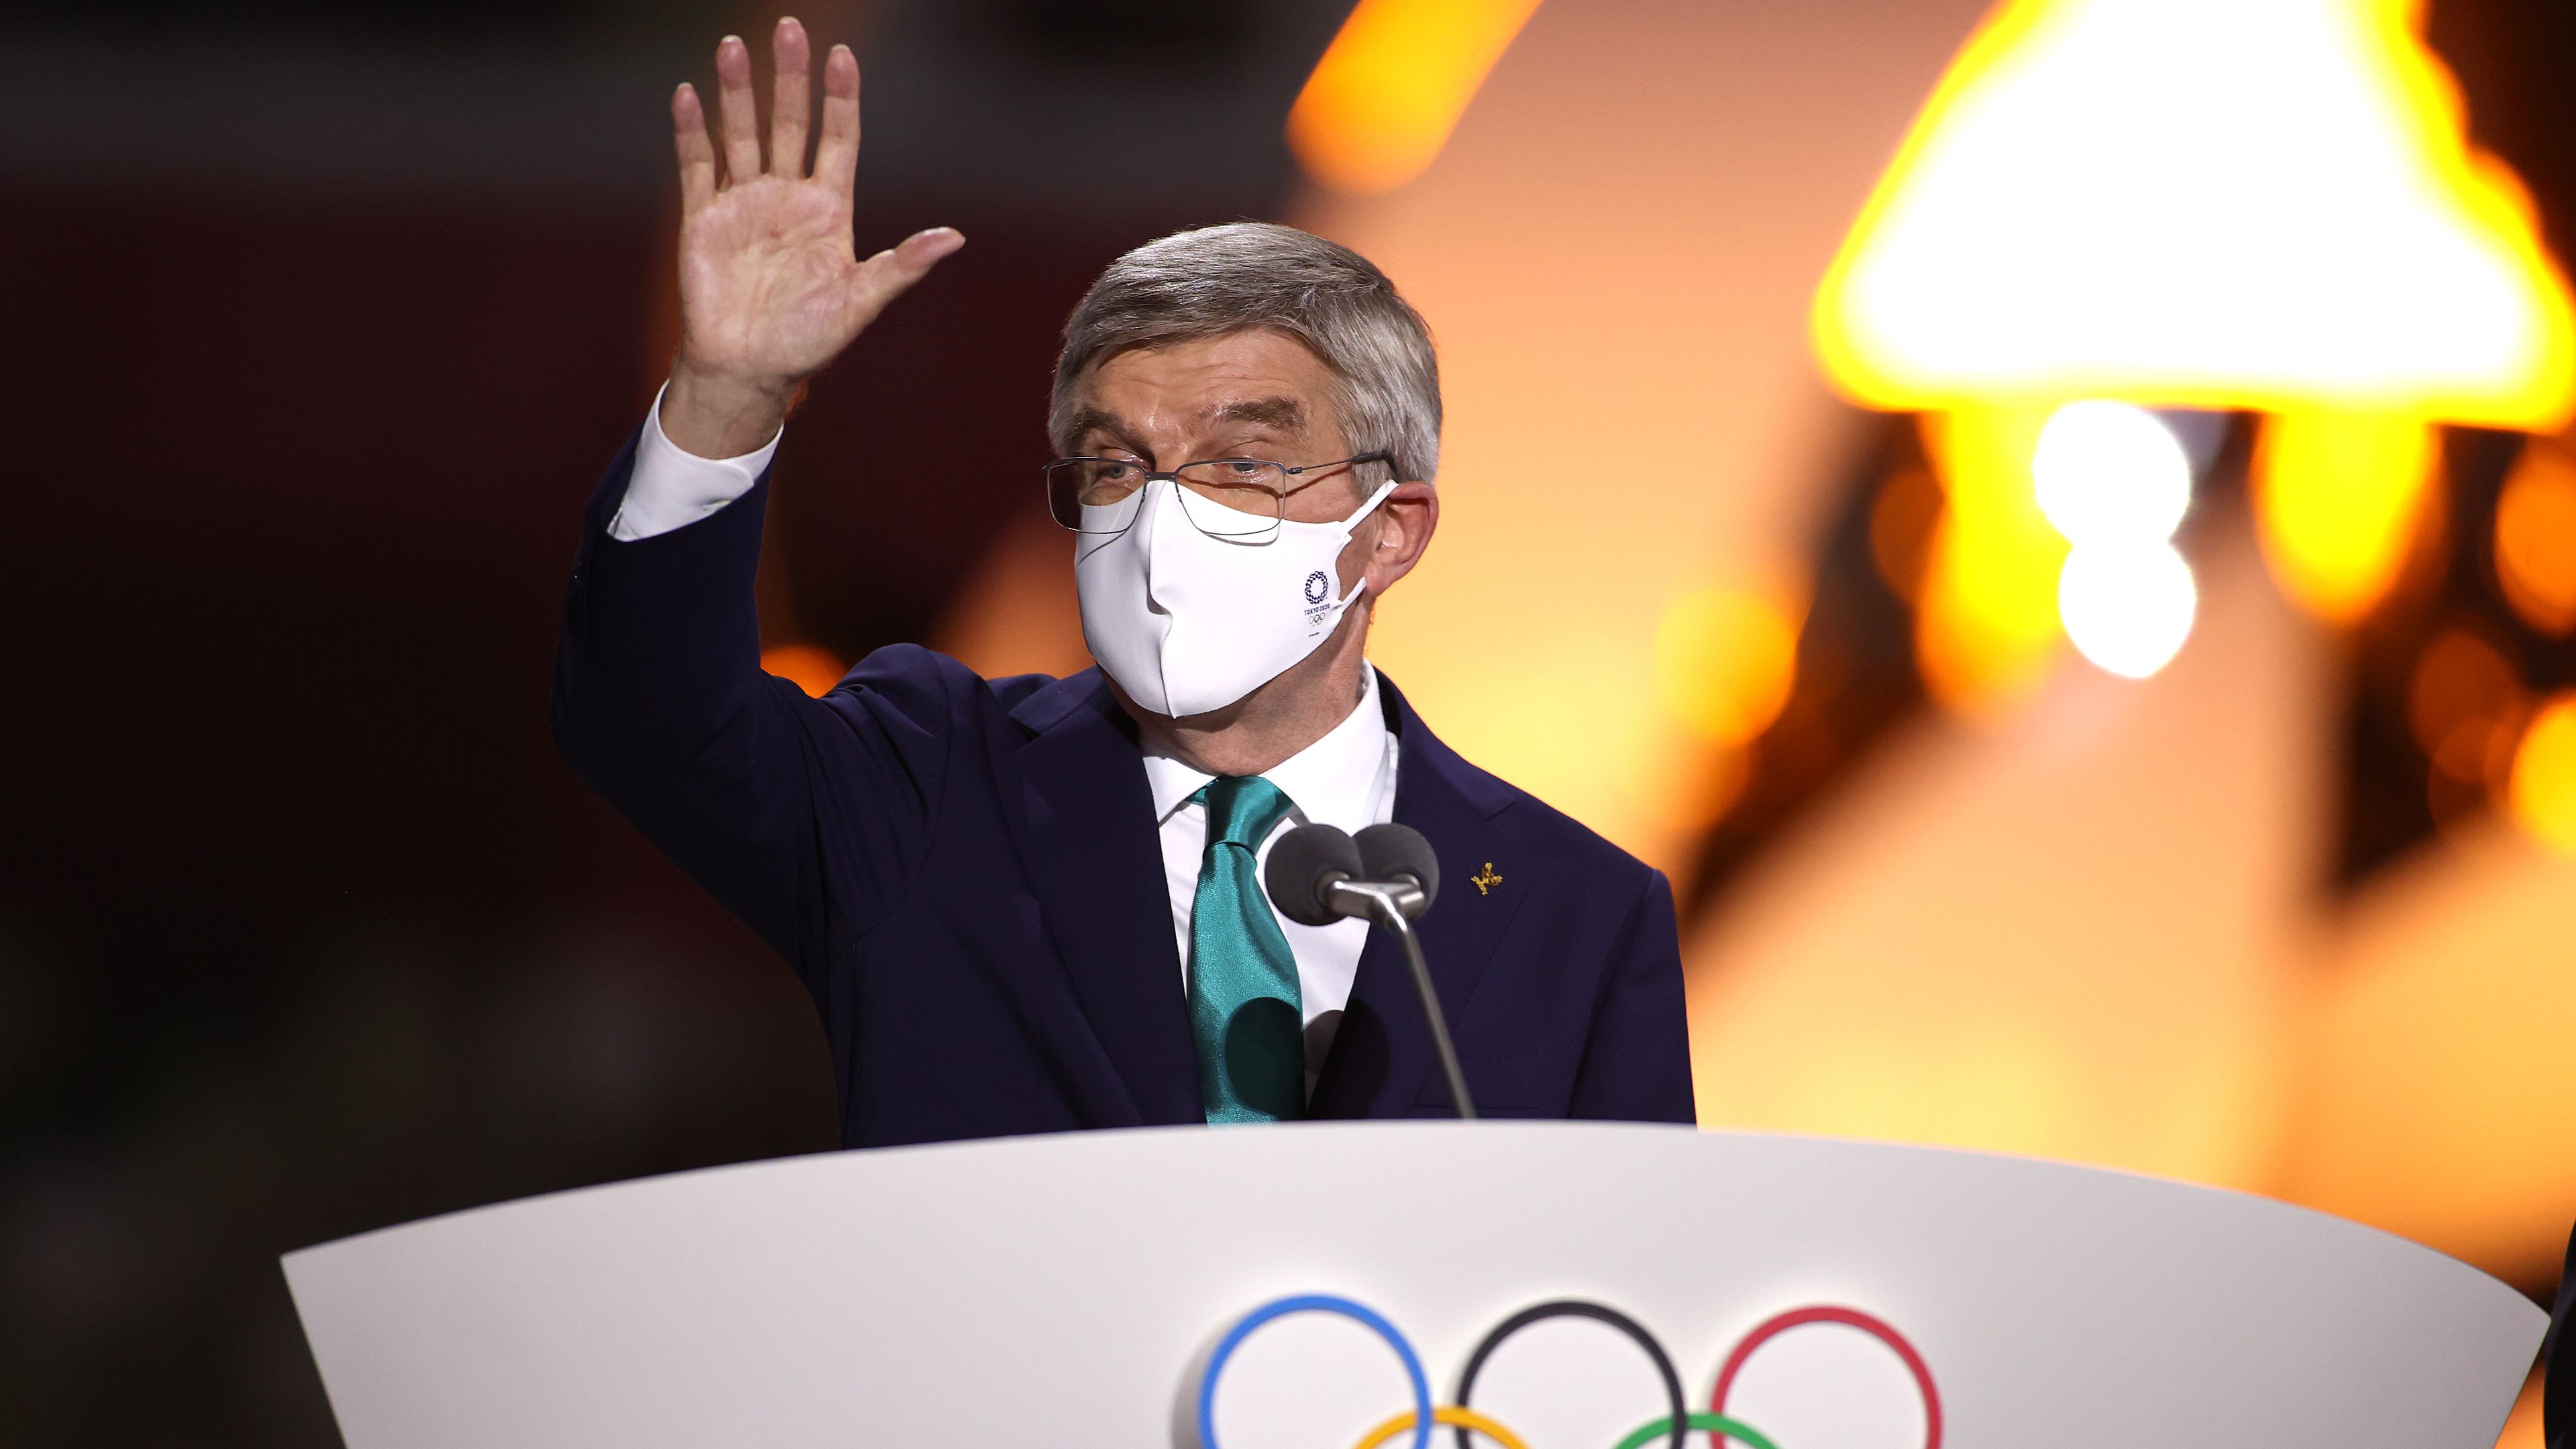 Olympics boss shares fear as Tokyo Games close